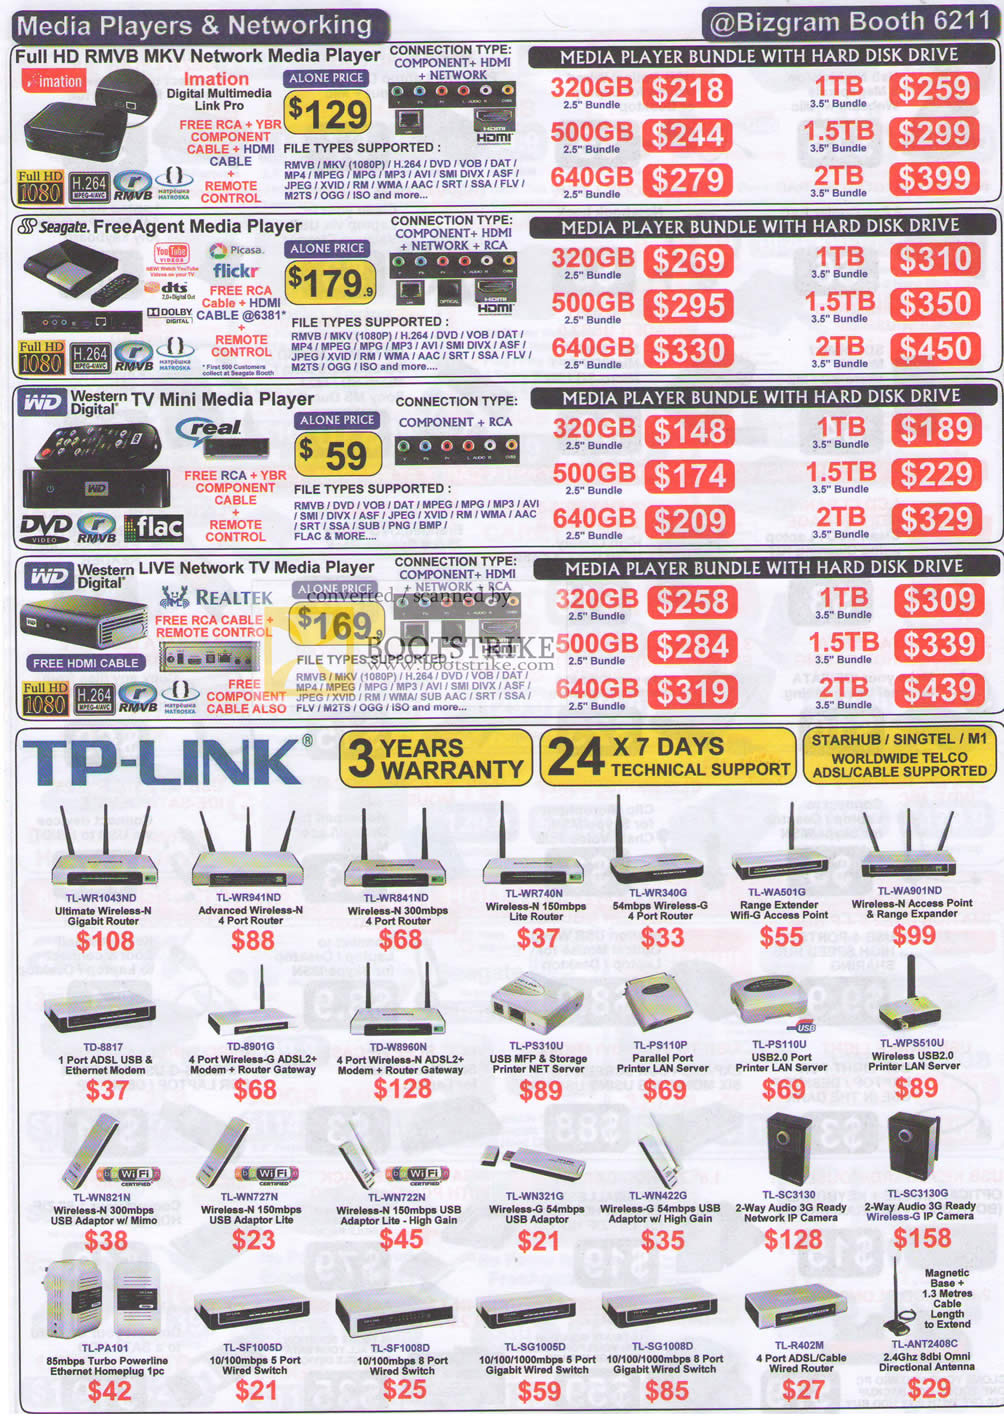 IT Show 2010 price list image brochure of Bizgram Media Players Imation Seagate WD TV Mini TP Link Router Switches Wireless LAN Powerline Server